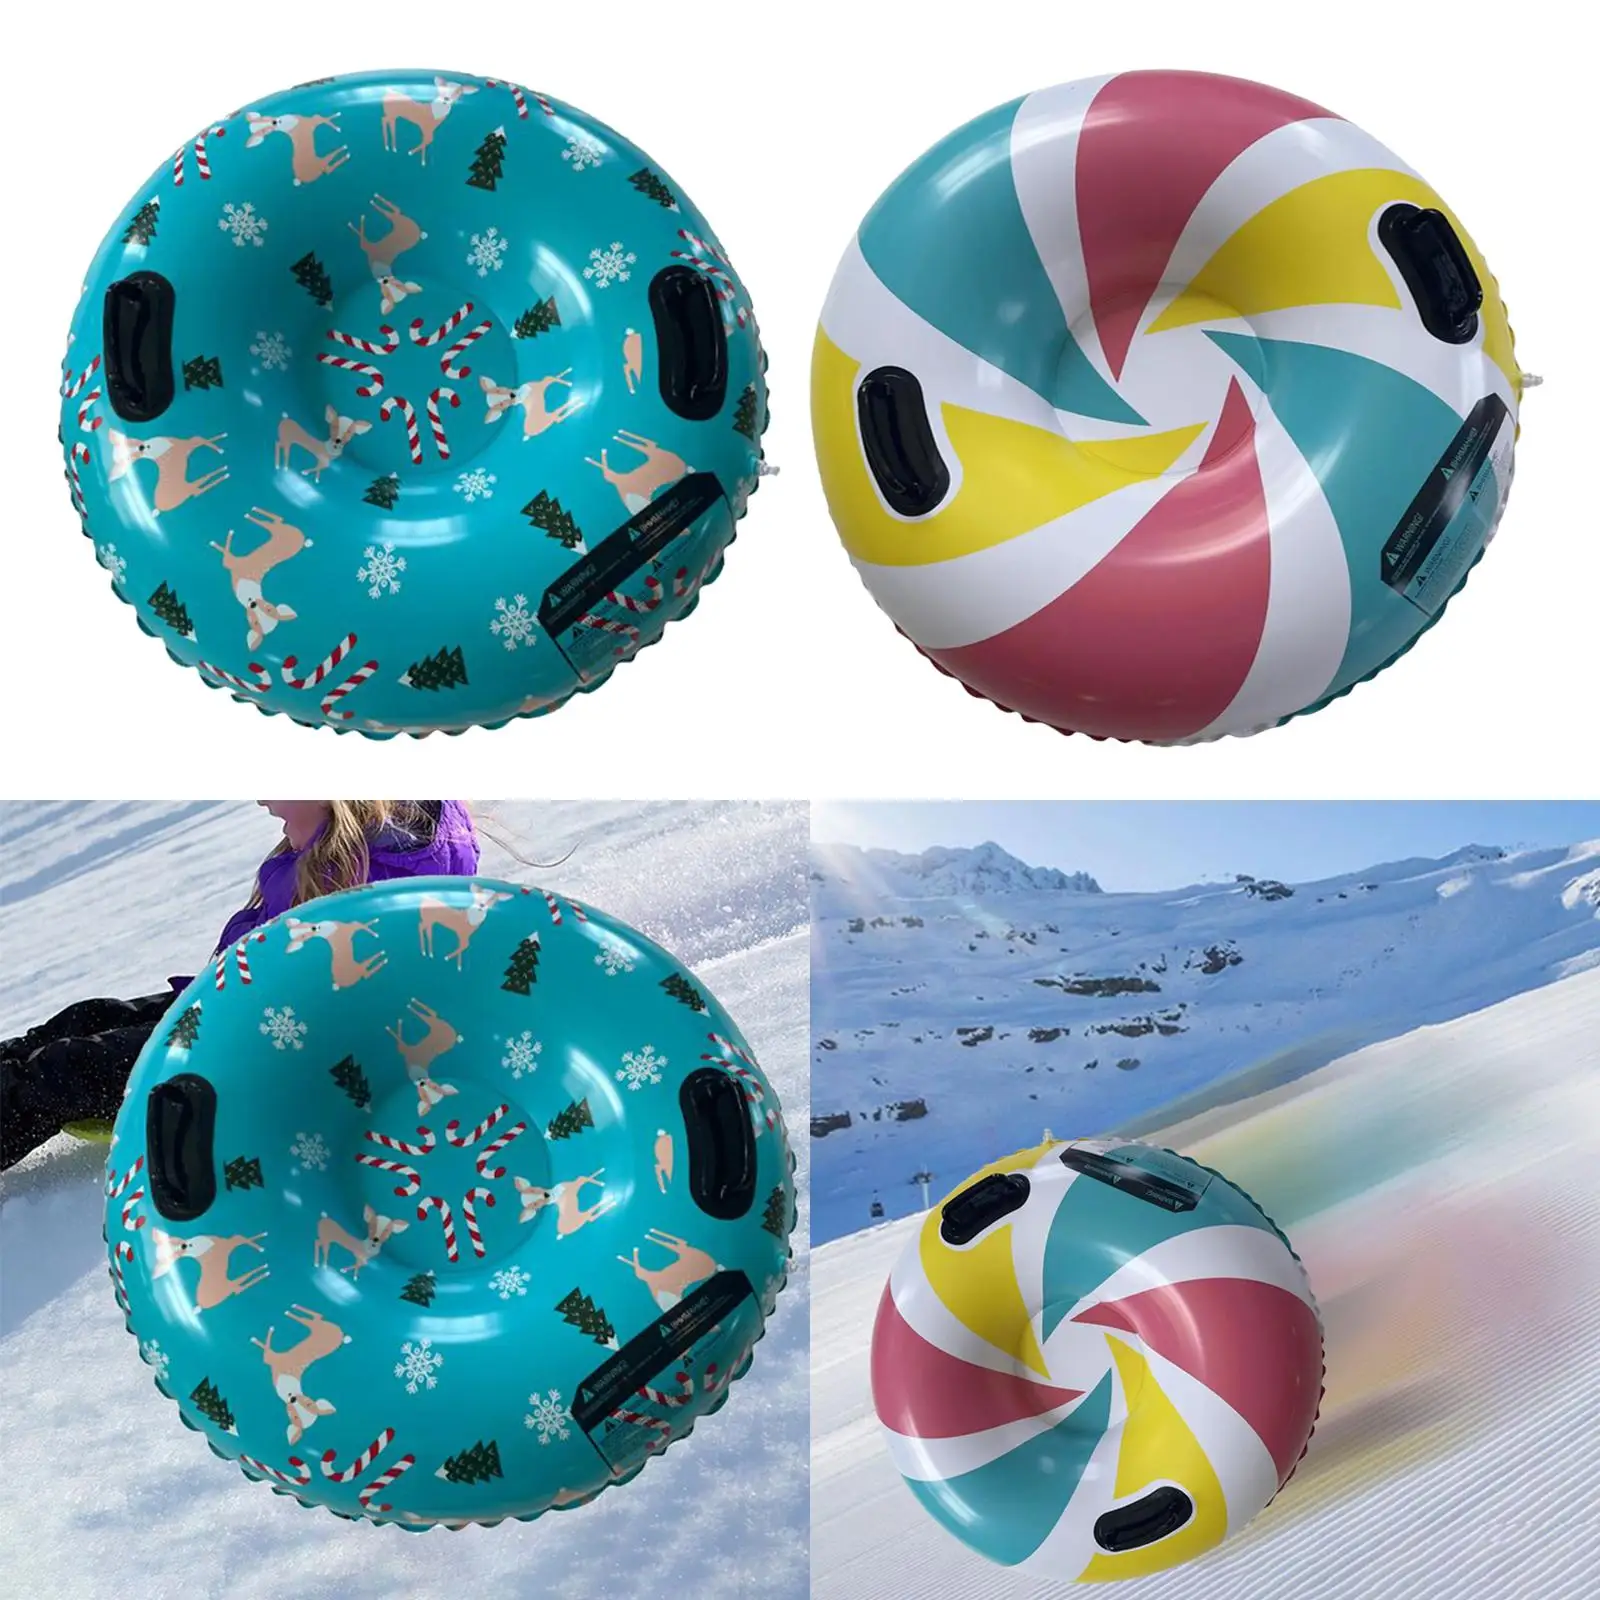 Heavy Duty Winter Snow Tube Easy to Carry Dia 91cm Tube Snow Toys with Thickness